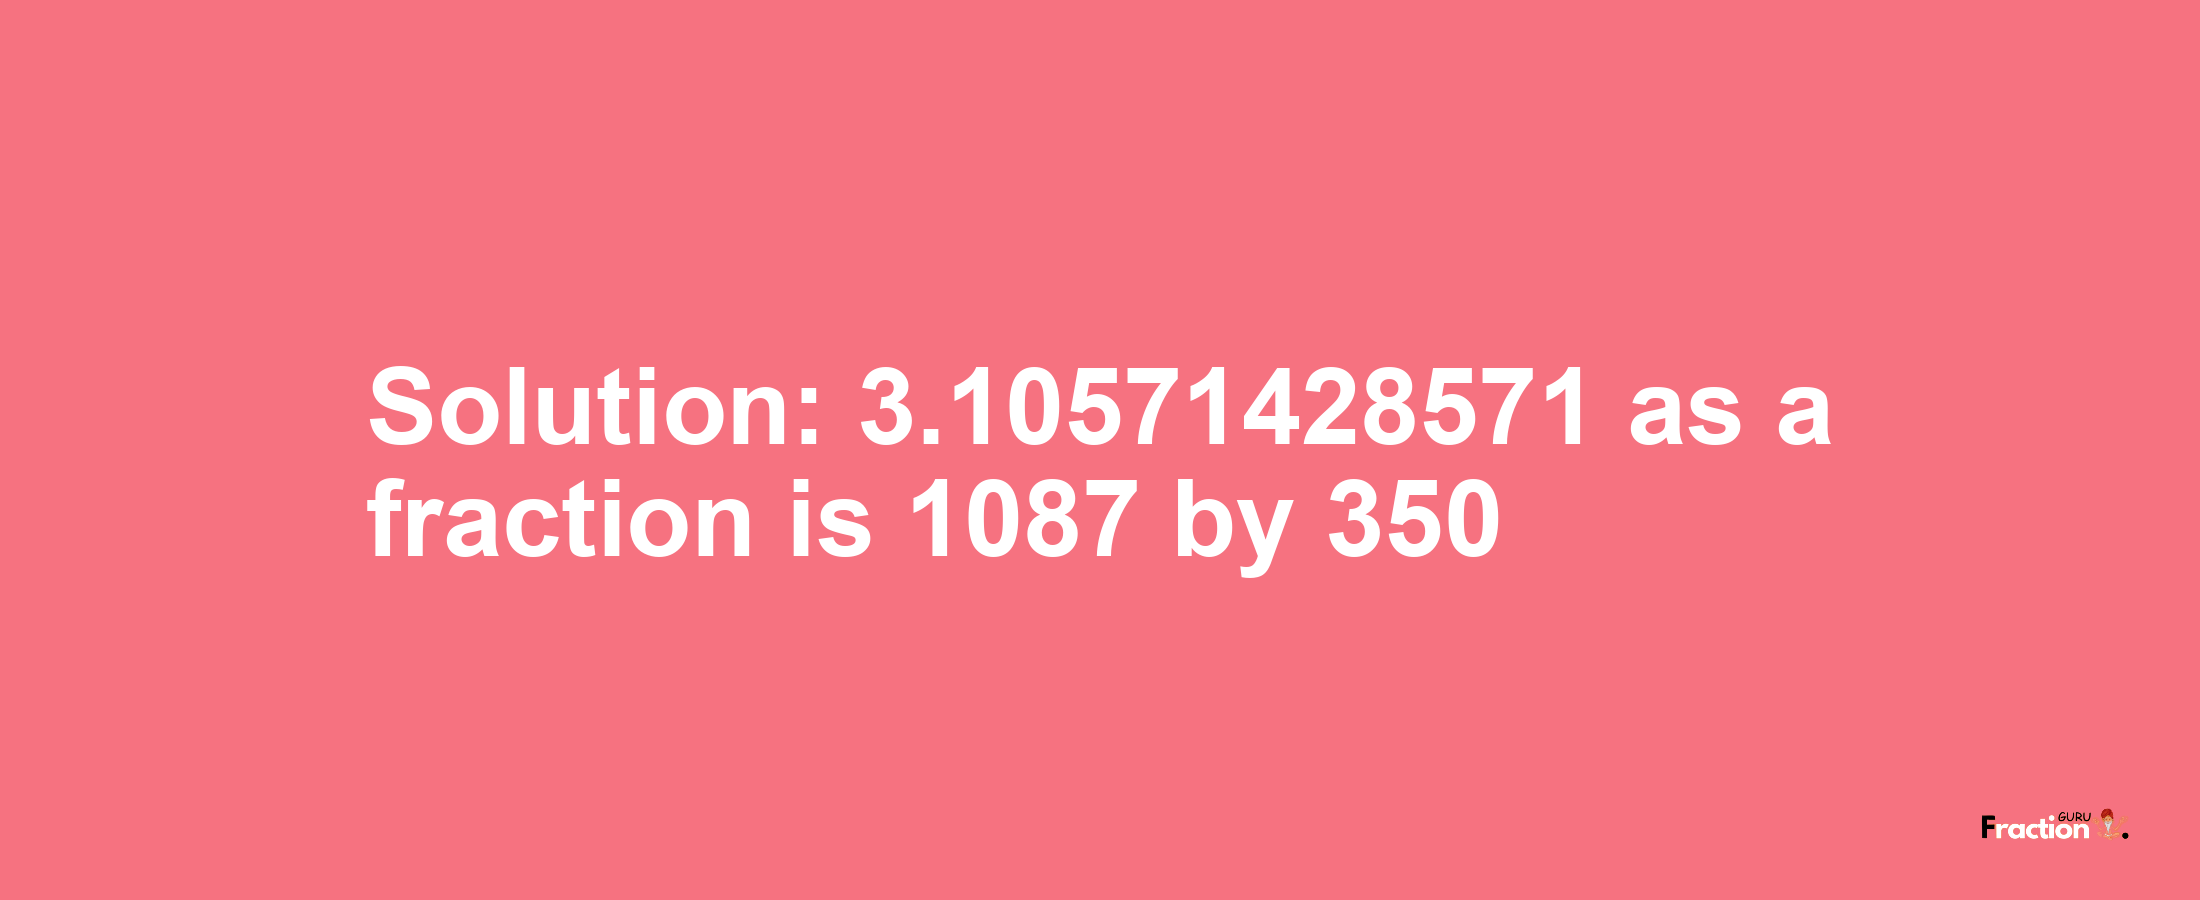 Solution:3.10571428571 as a fraction is 1087/350